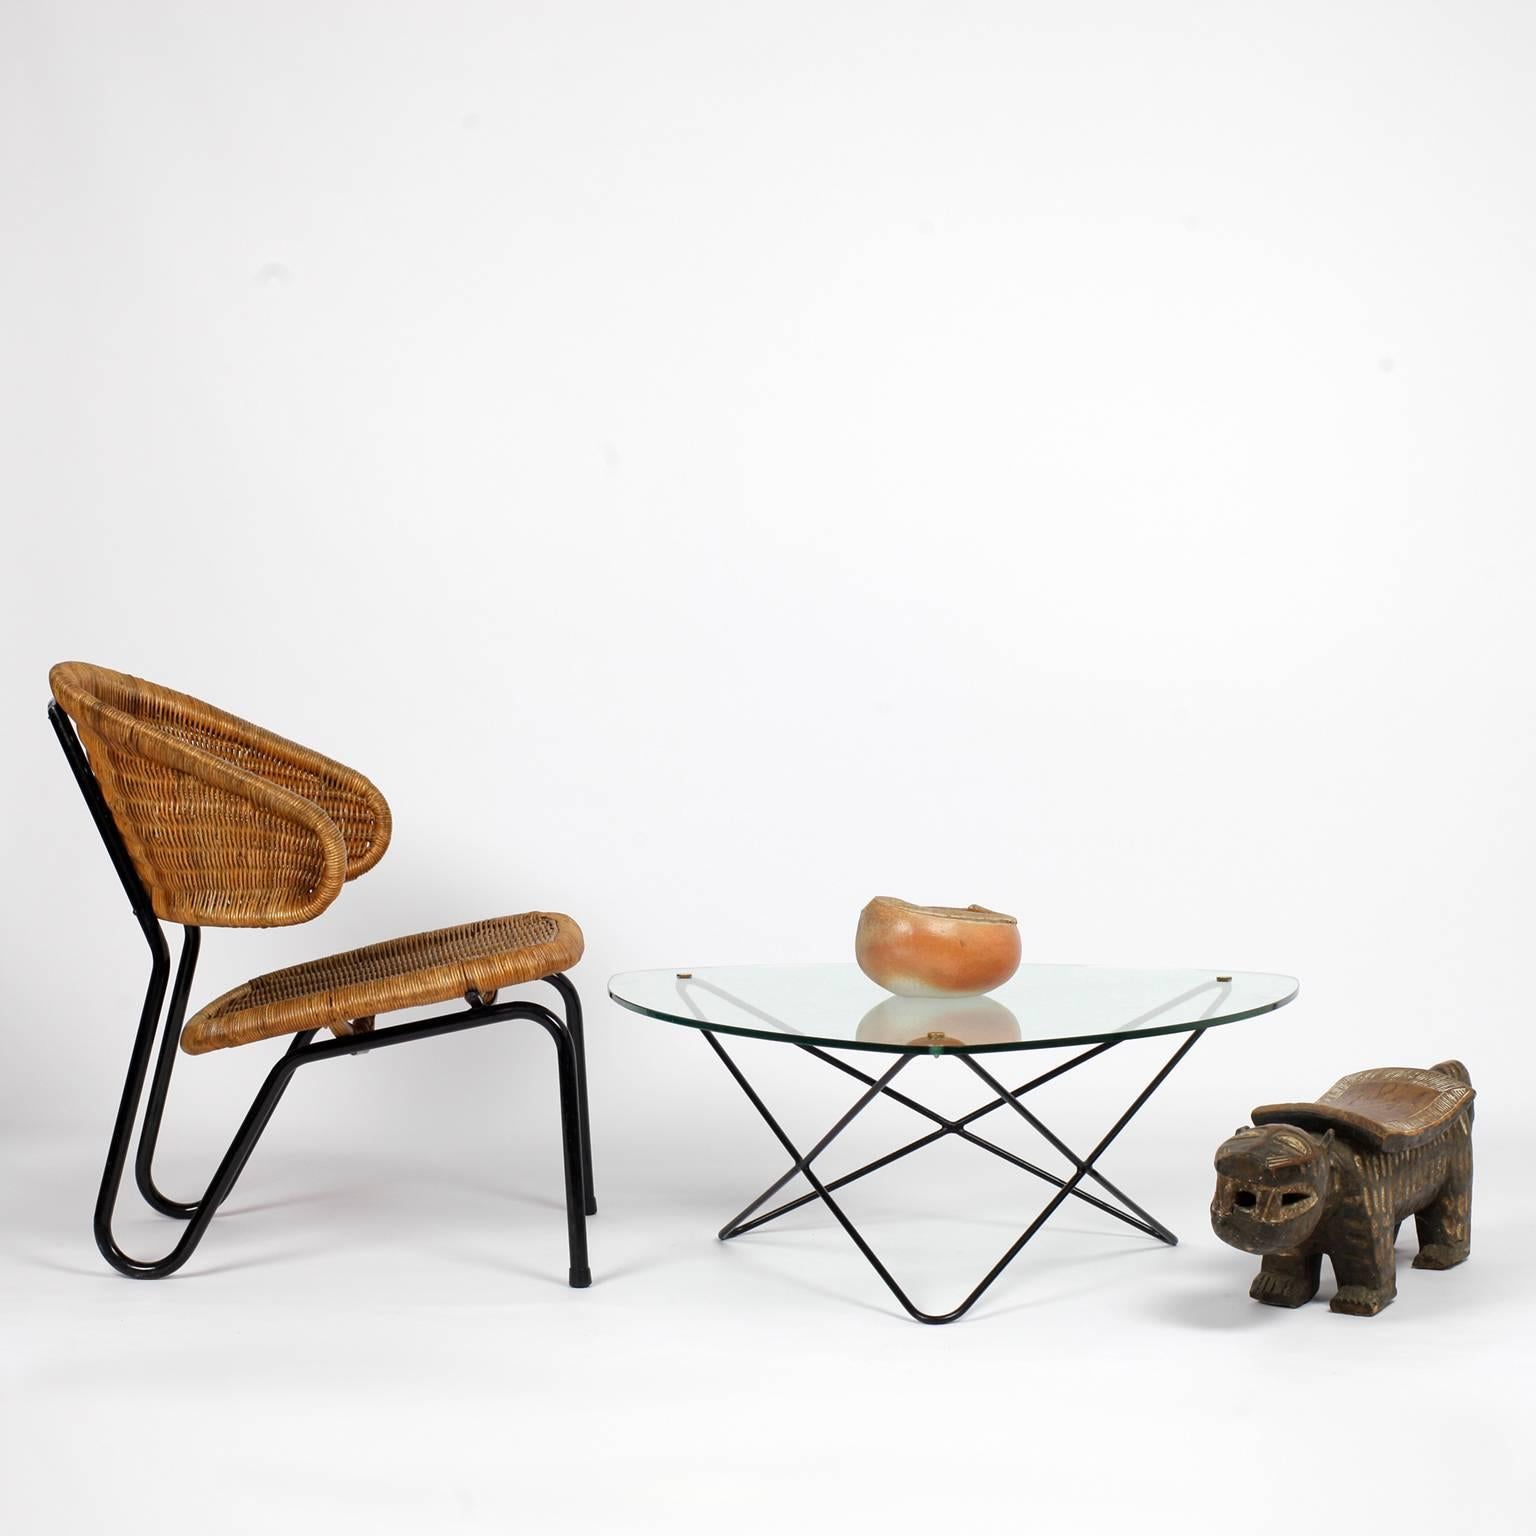 Very rare Dirk van Sliedregt rattan lounge chair with black lacquered metal leg for Gebr. Jonkers Noordwolde. Model 568 created in 1954.
Beautiful patina.
This chair is no longer manufactured.
Referenced by the Stedelijk Design Museum Amsterdam